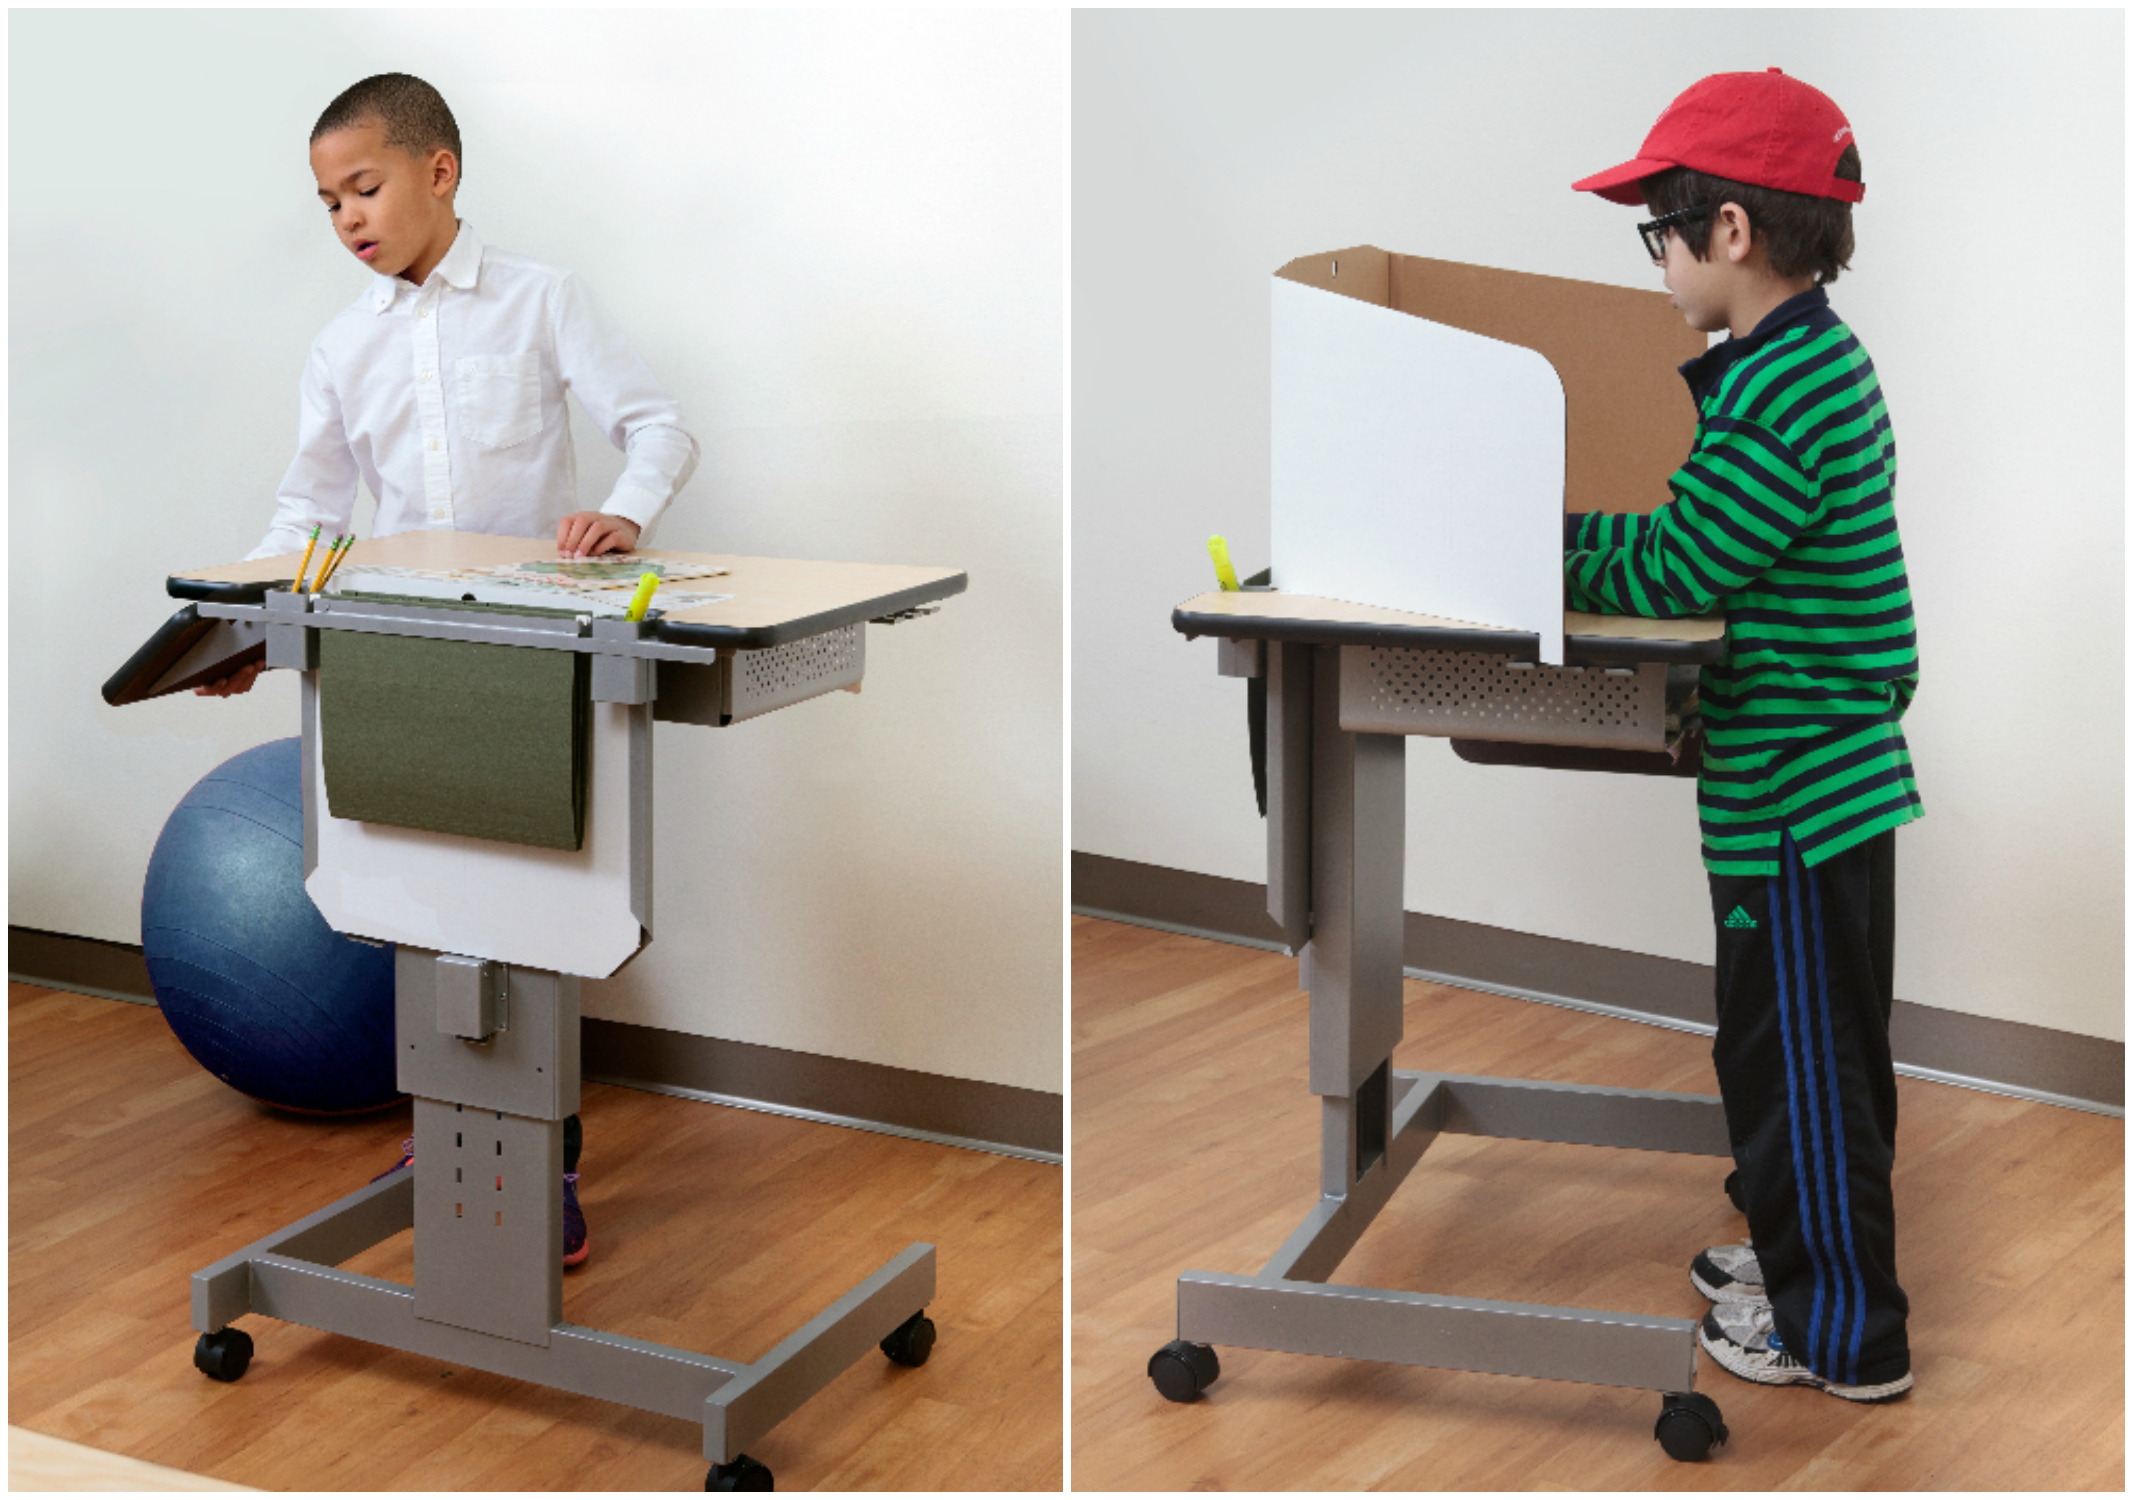 The Focus Desk can be easily adjusted by students. Teacher-recommended features hanging folders, divided interior shelves, a backpack hook, a drop-leaf worktop extension, and privacy walls.